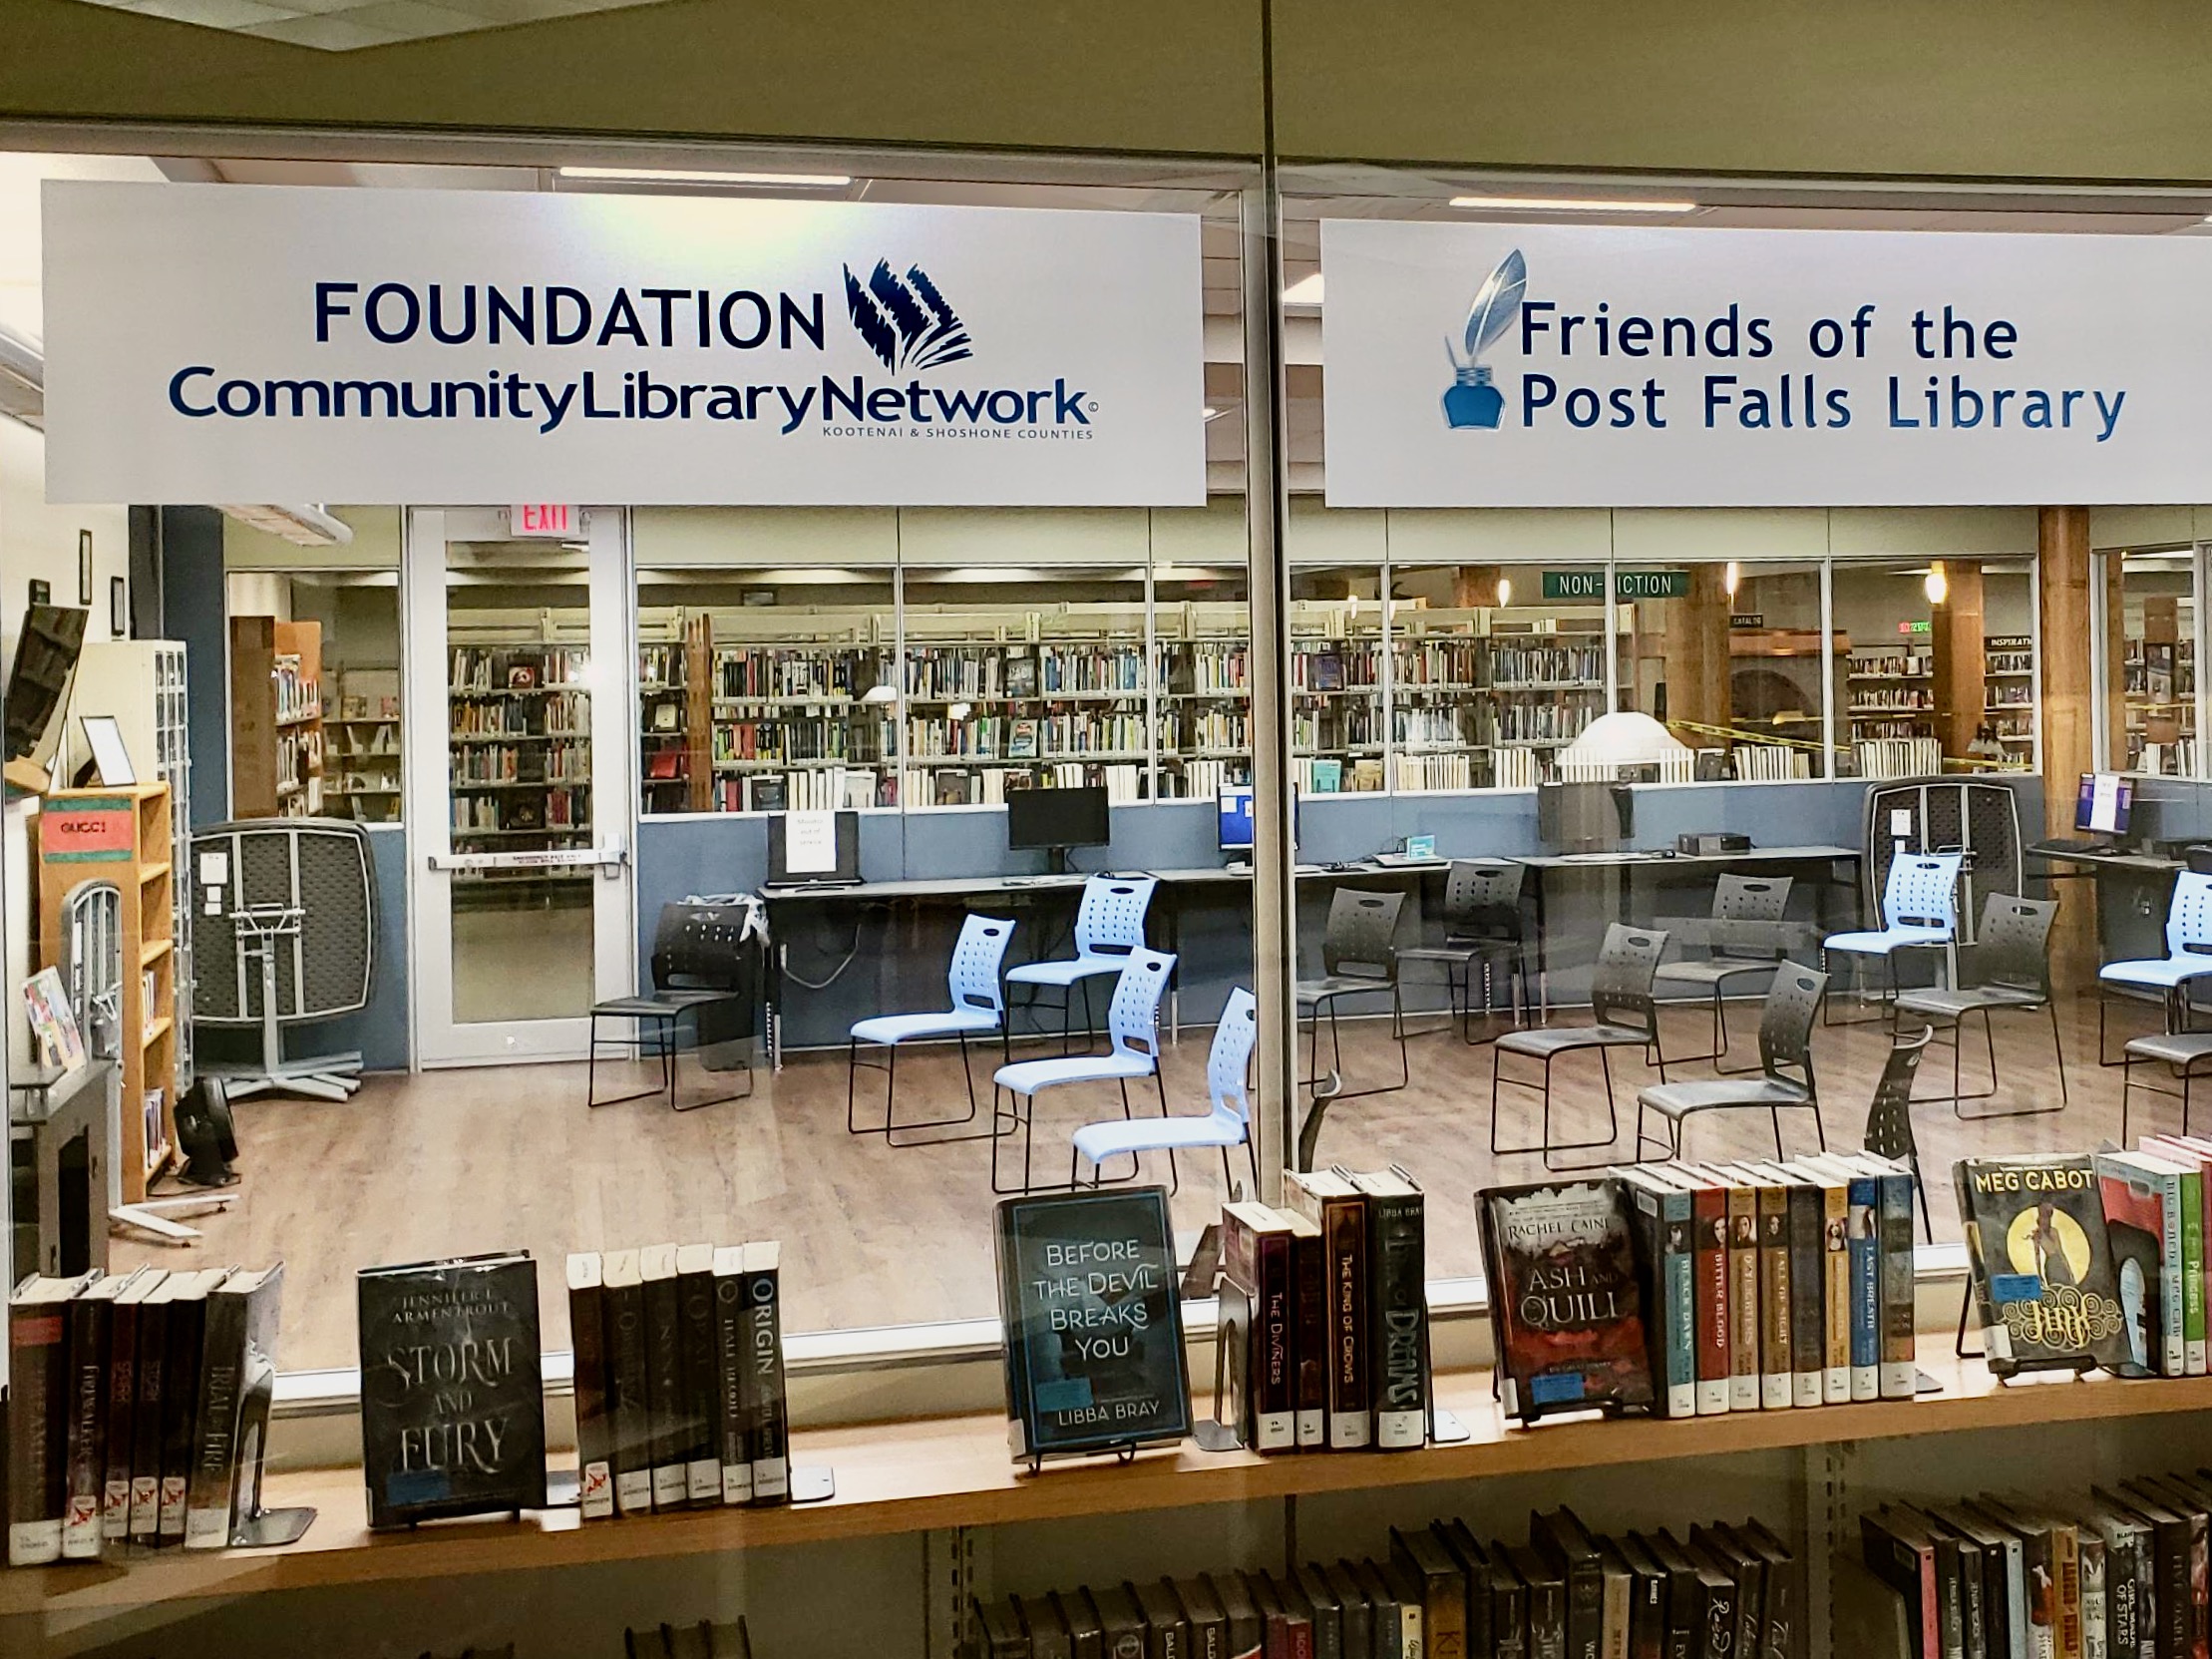 Foundation signage recognizing donation to teen space in post falls library